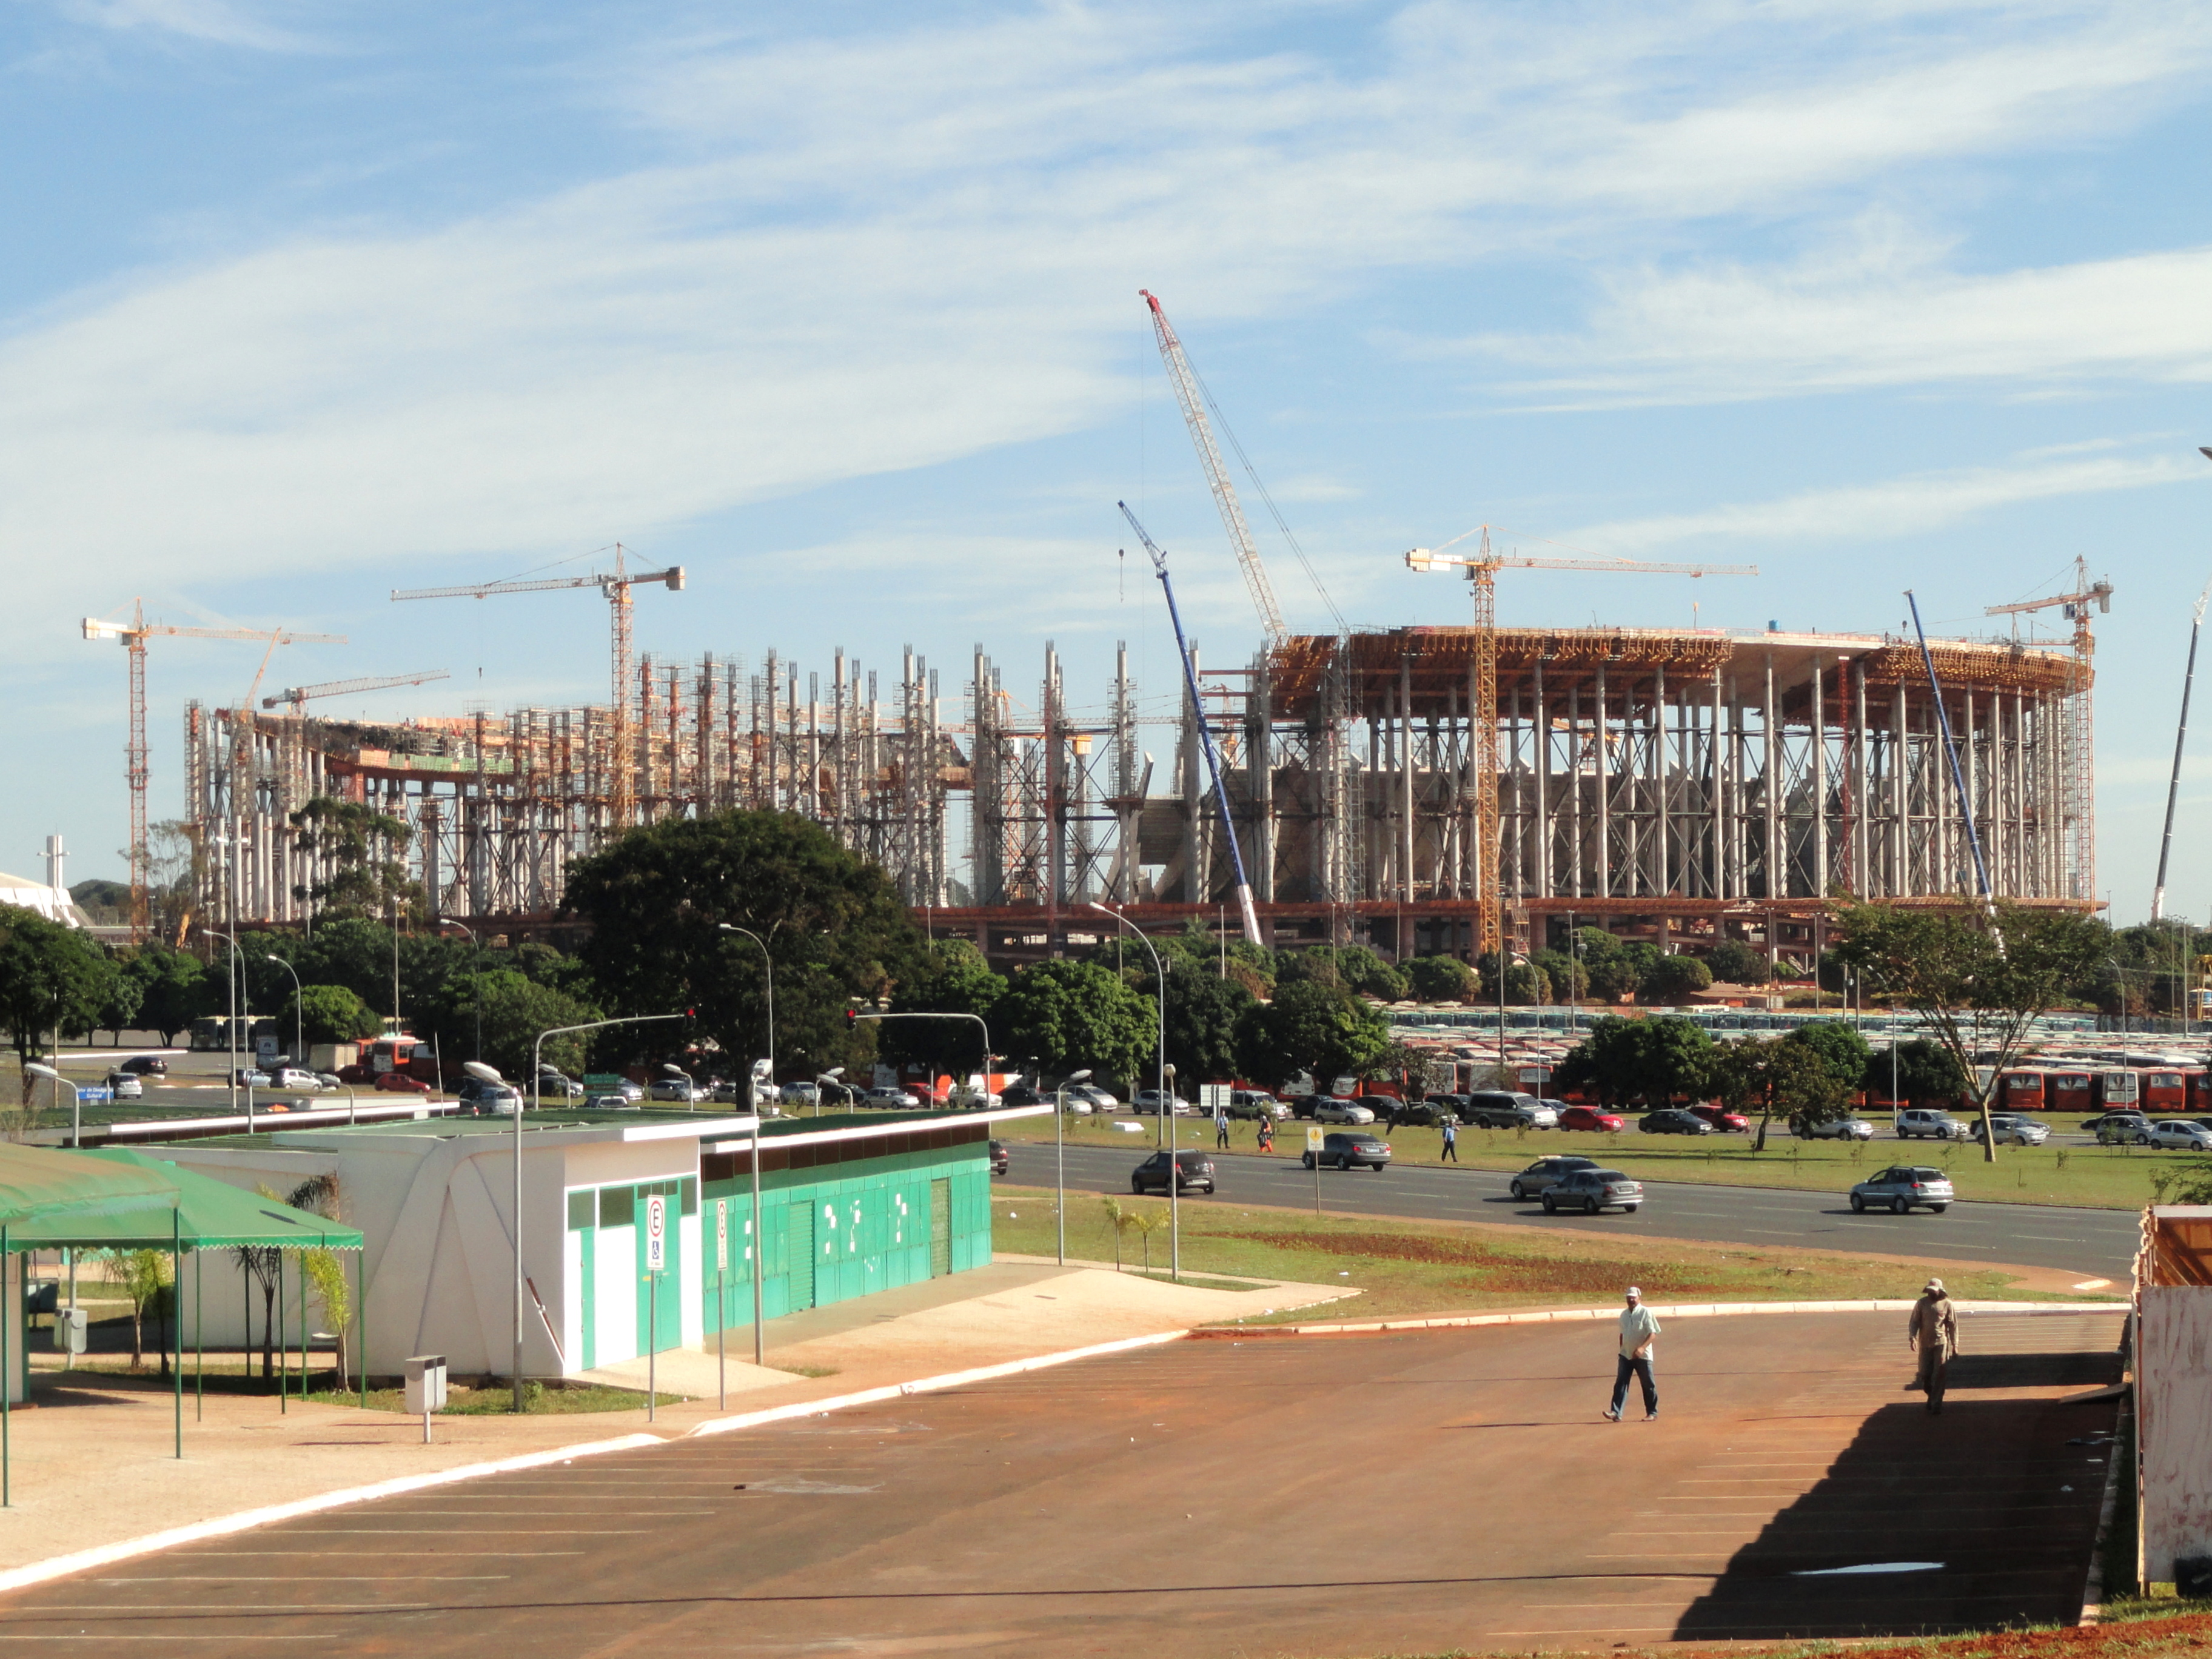 More Progress in Two World Cup Cities